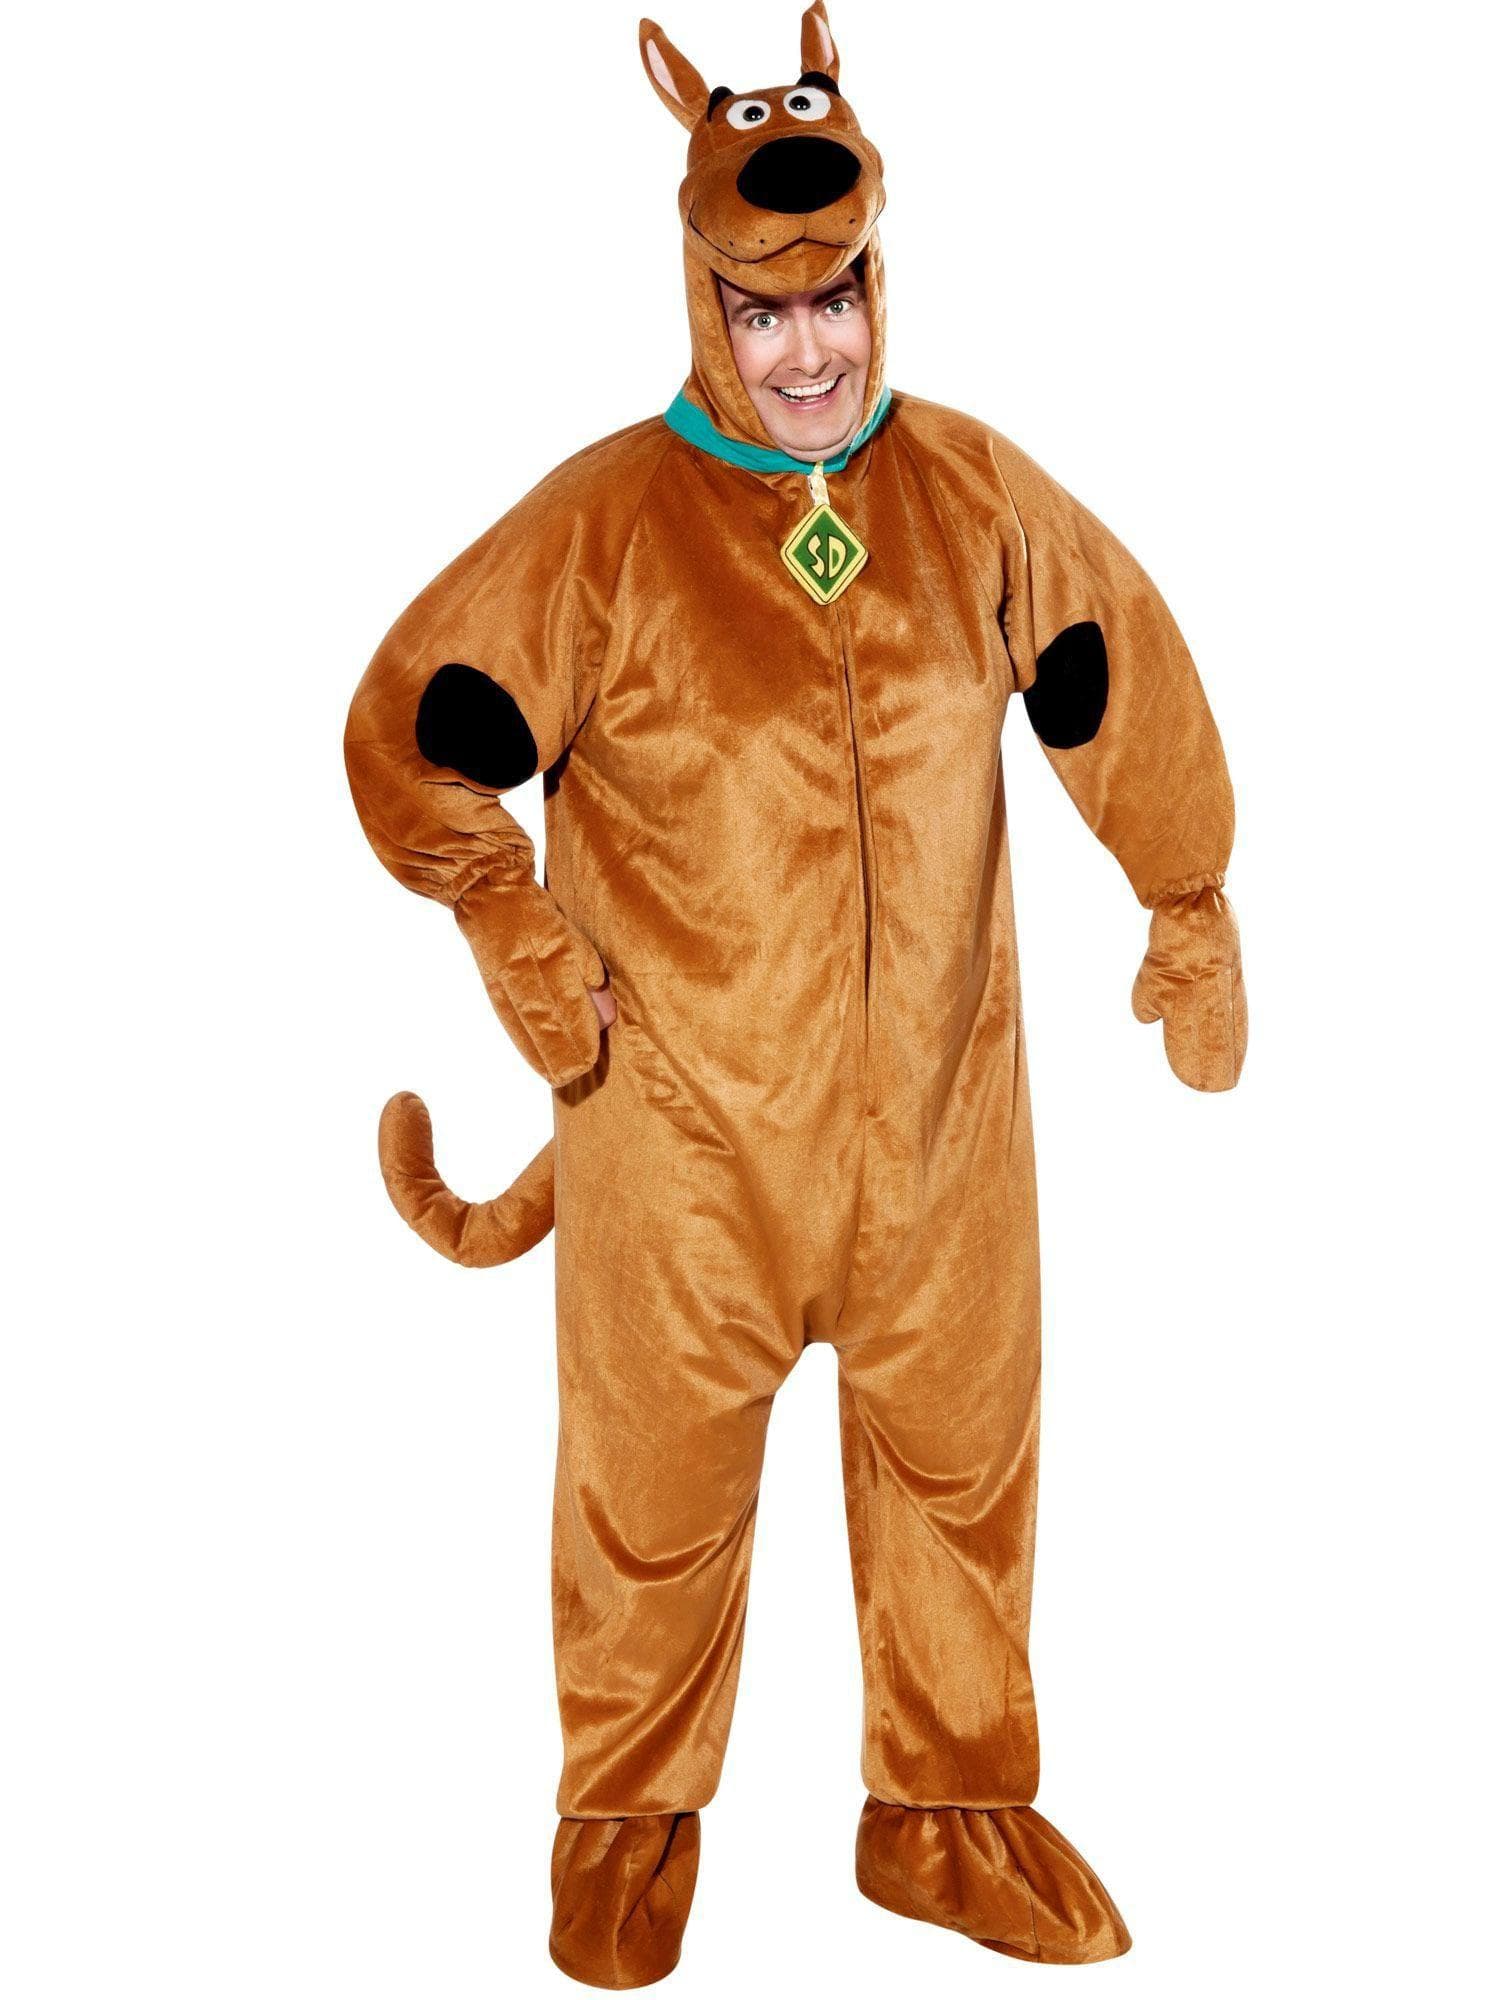 Adult Pus Size Scooby-Doo Costume - costumes.com